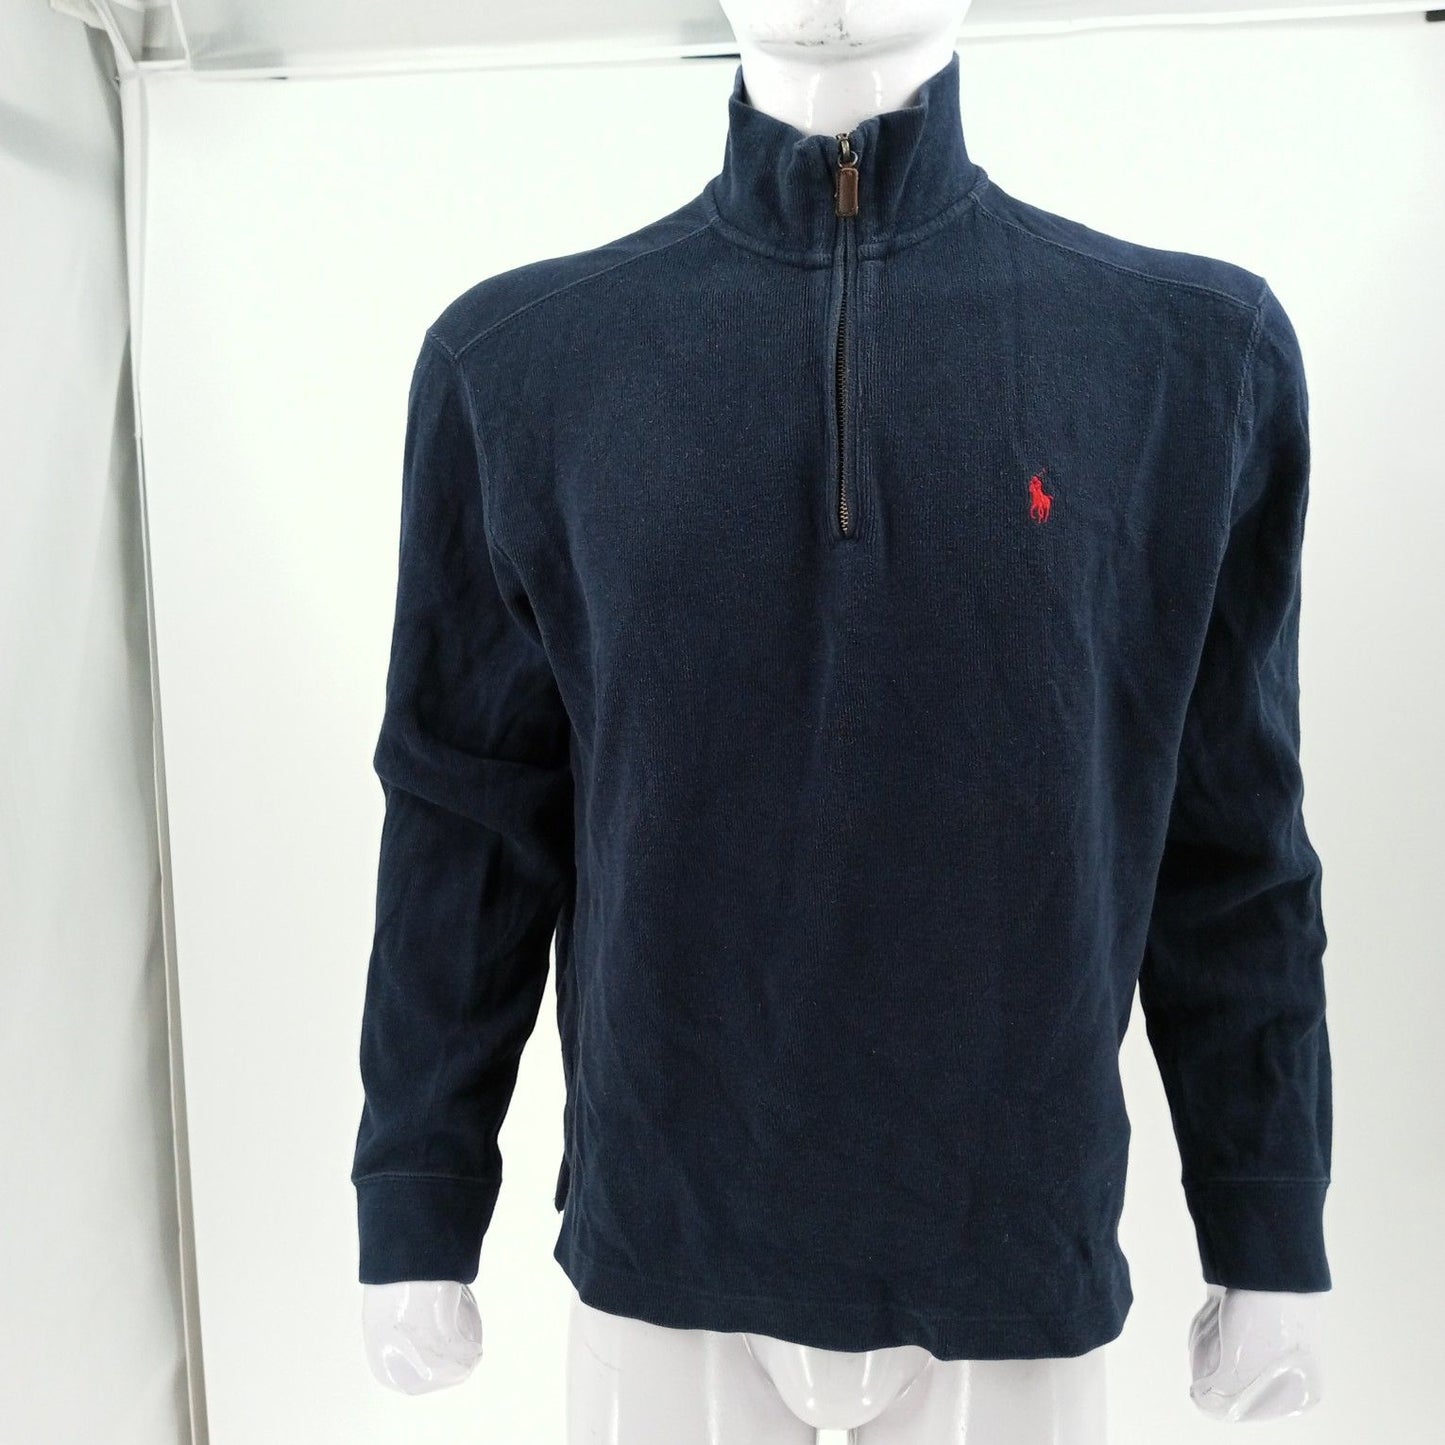 Polo Ralph Lauren, Tommy Hilfiger, and Others Jackets/Sweaters/Vest Box 18 Count